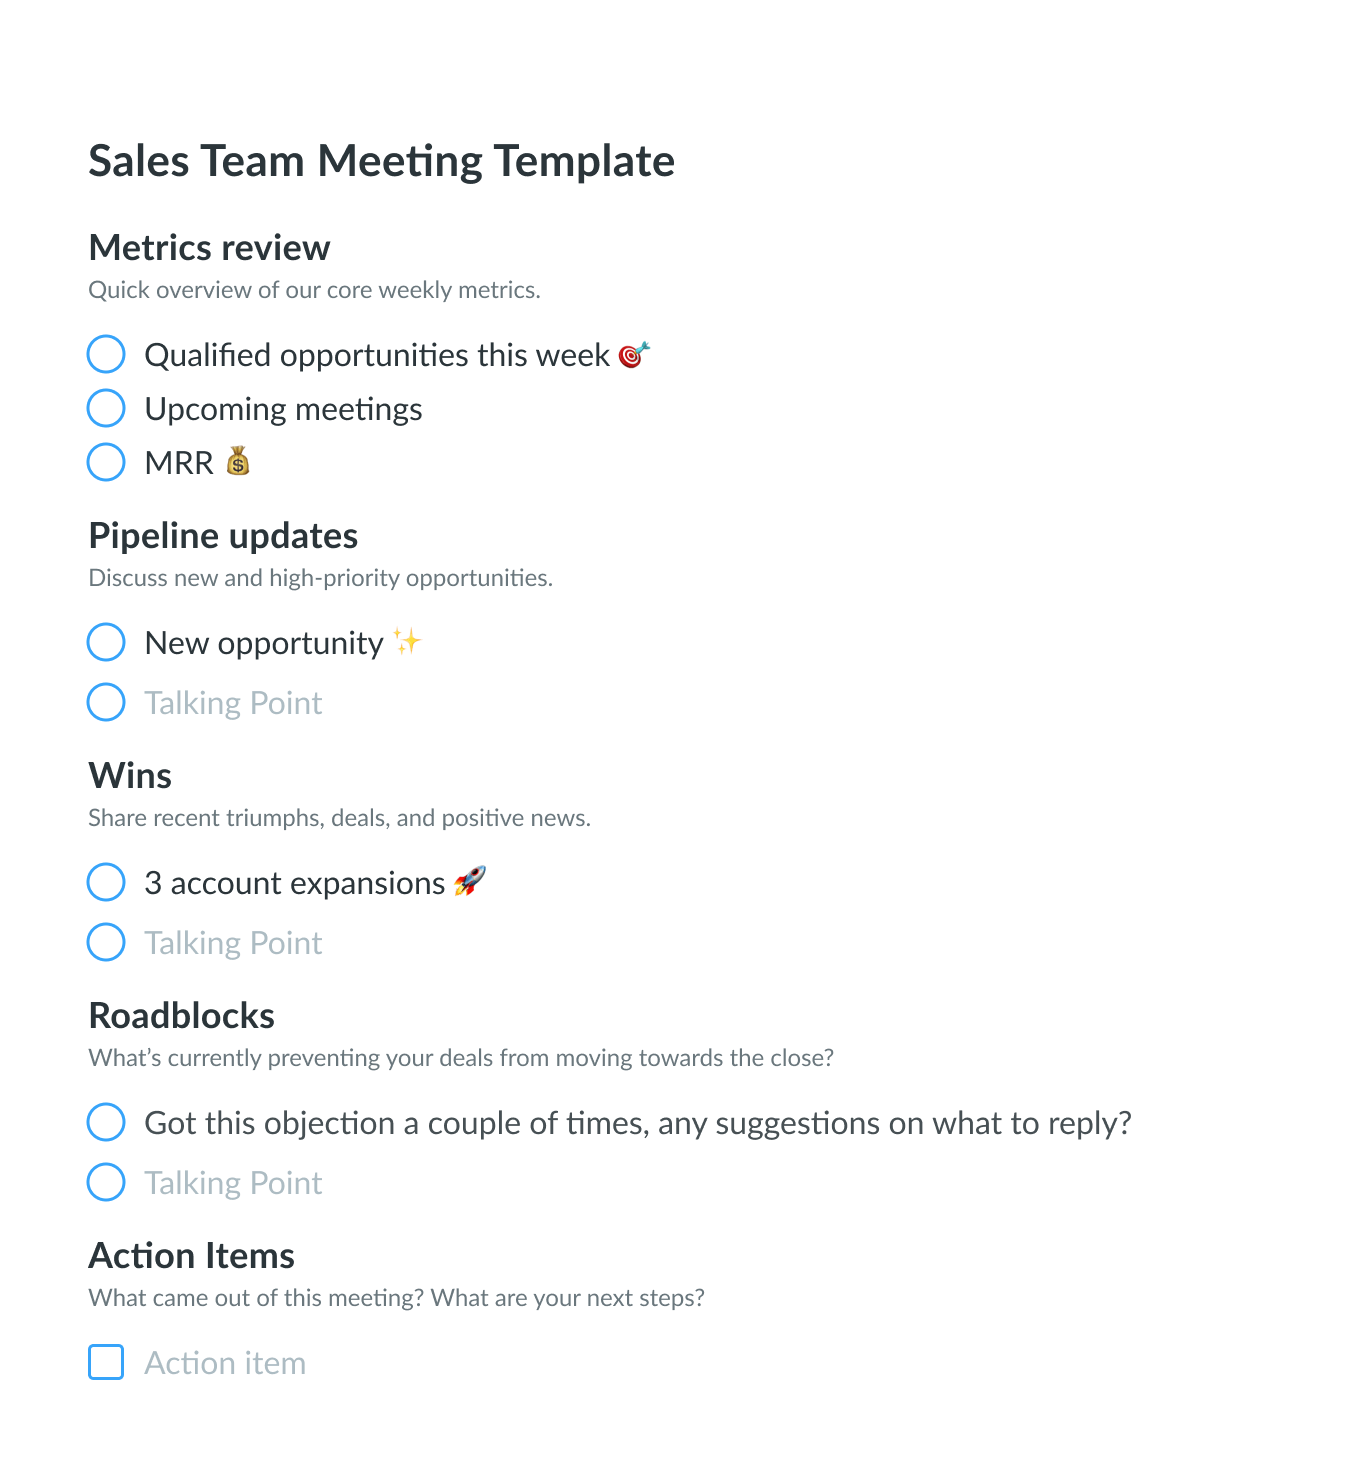 Sales Meeting Agenda Template for Efficient Teams